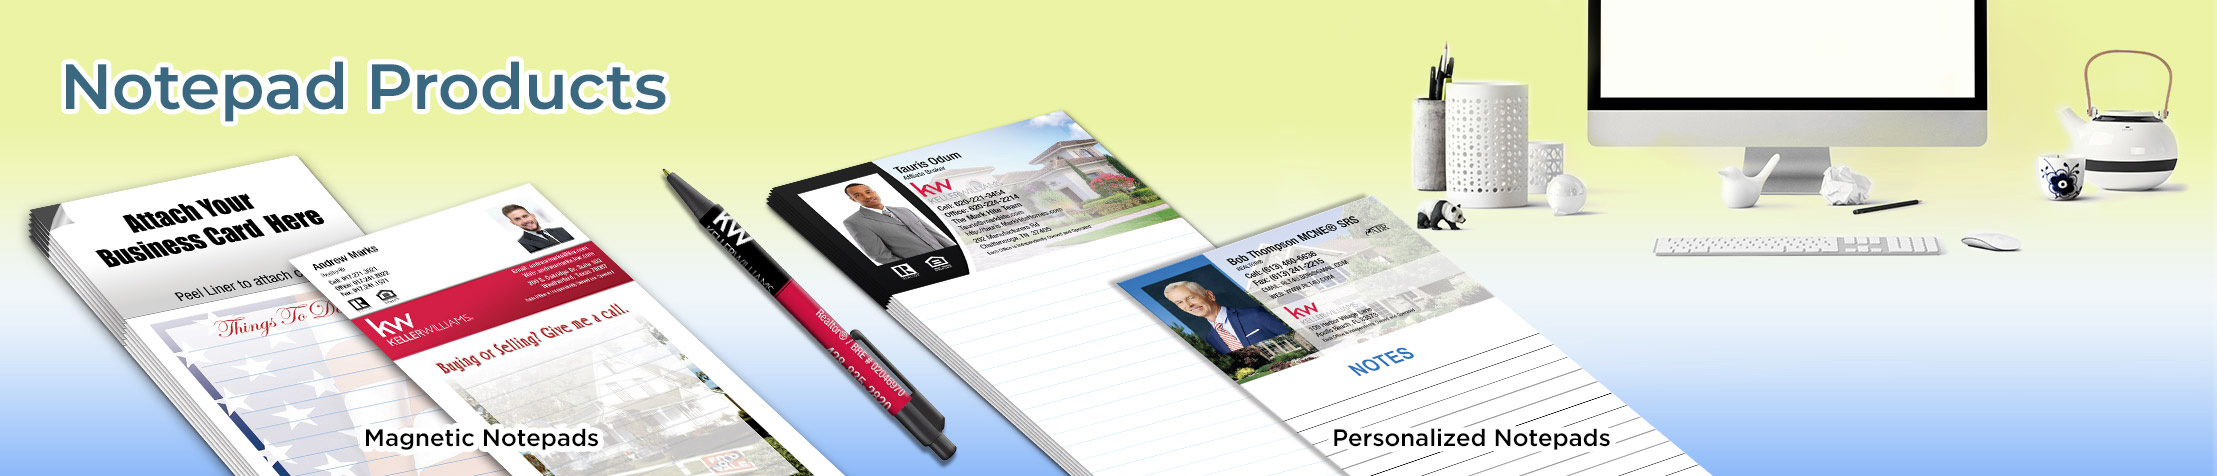 Keller Williams Real Estate Notepads - KW approved vendor custom stationery and marketing tools, magnetic and personalized notepads | BestPrintBuy.com